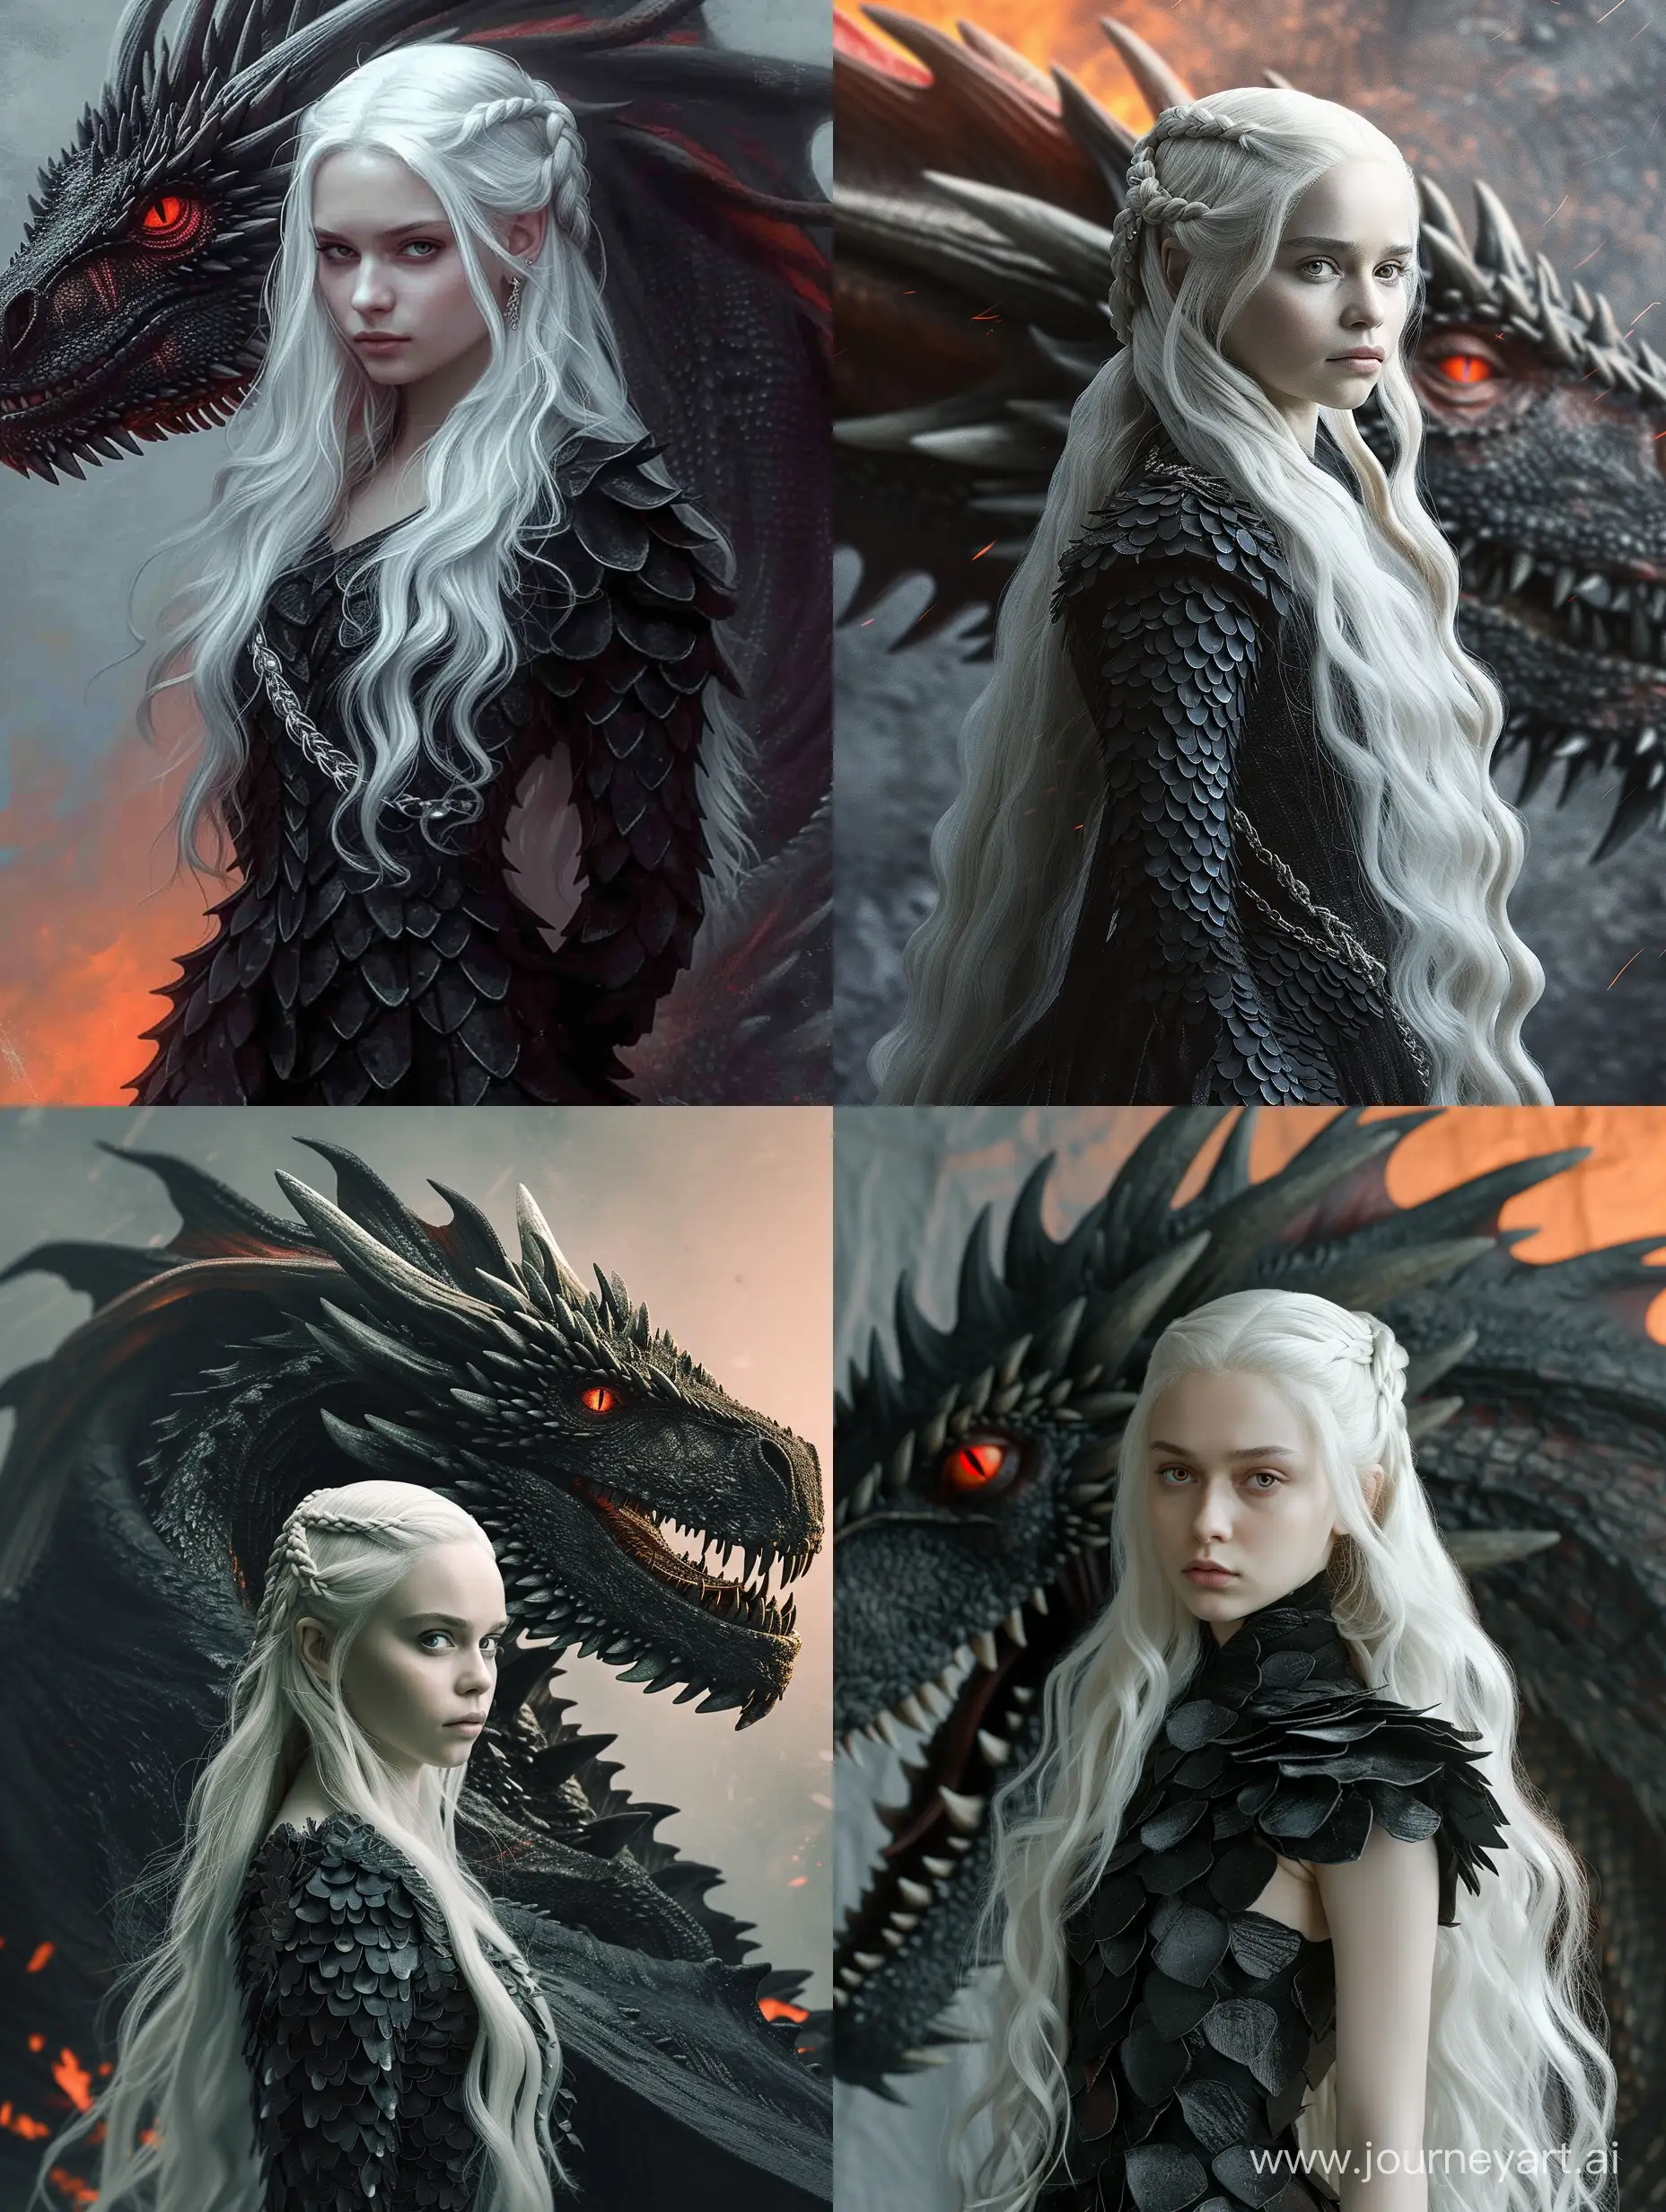 Actress Mia Goth as a Targaryen girl, she has long white hair, a confident look, she is wearing a black dress made of dragon scales, behind her is the head of a dragon with red eyes, Game of Thrones style, gray-orange light